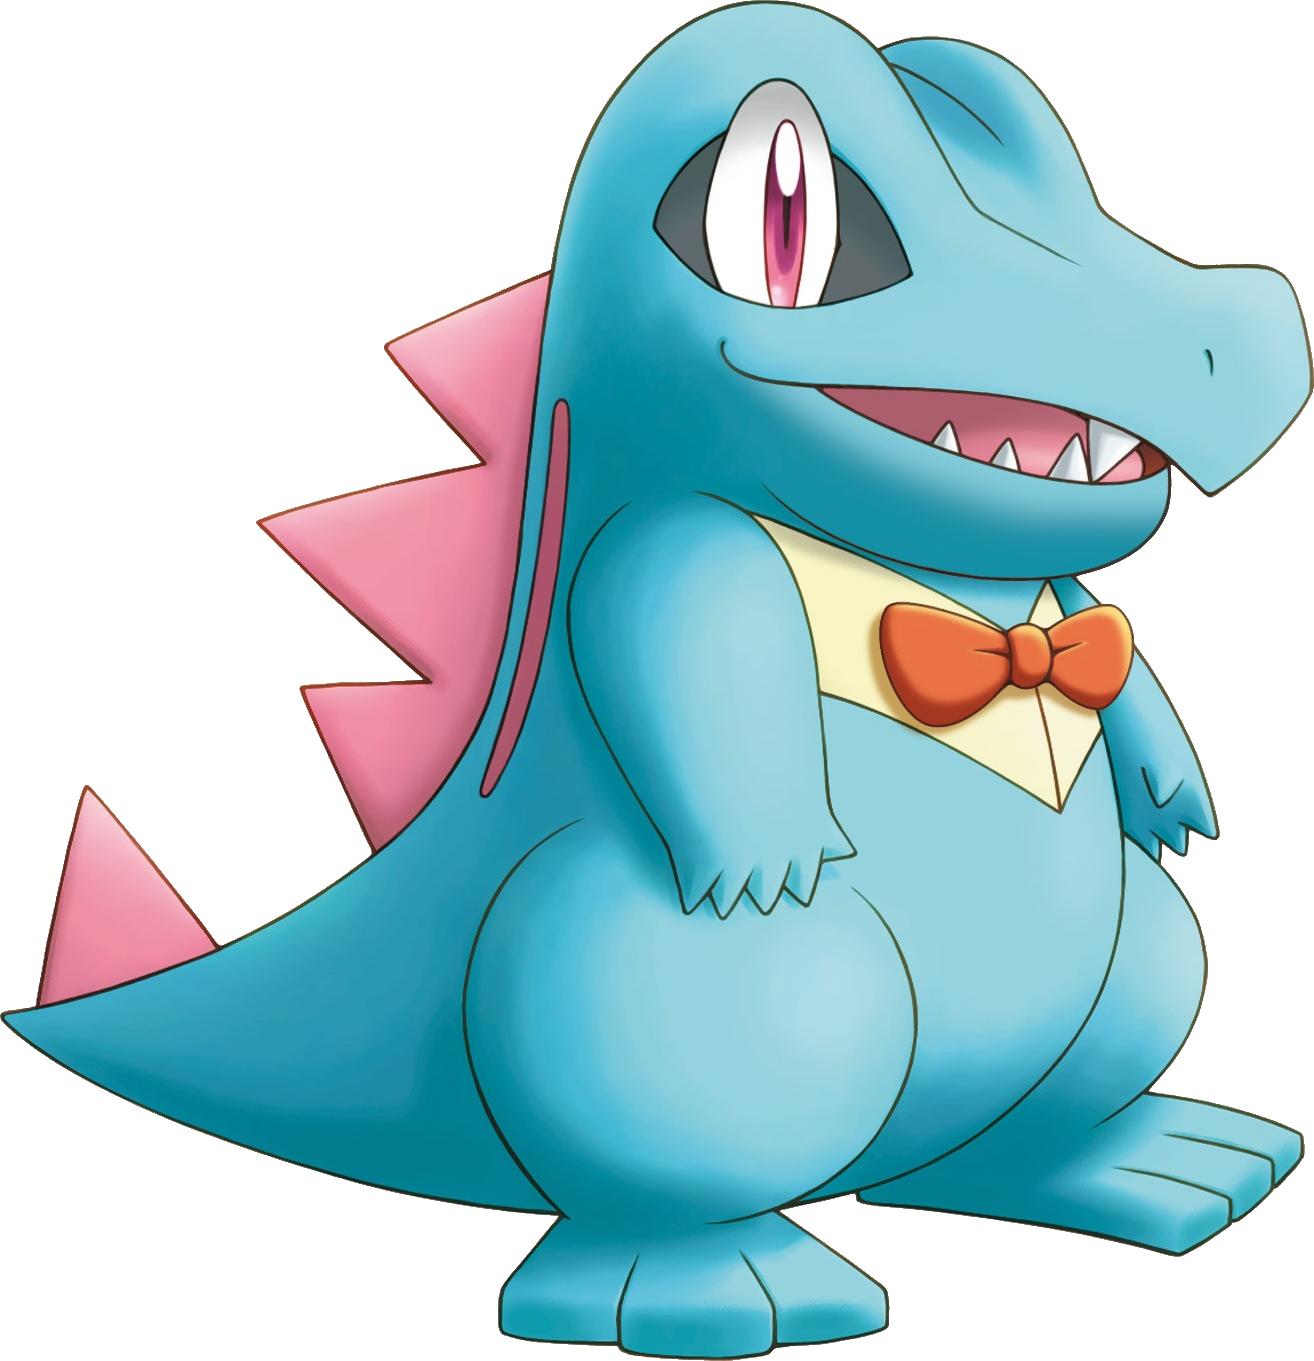 Pokemon Mystery Dungeon Totodile (1314x1361)